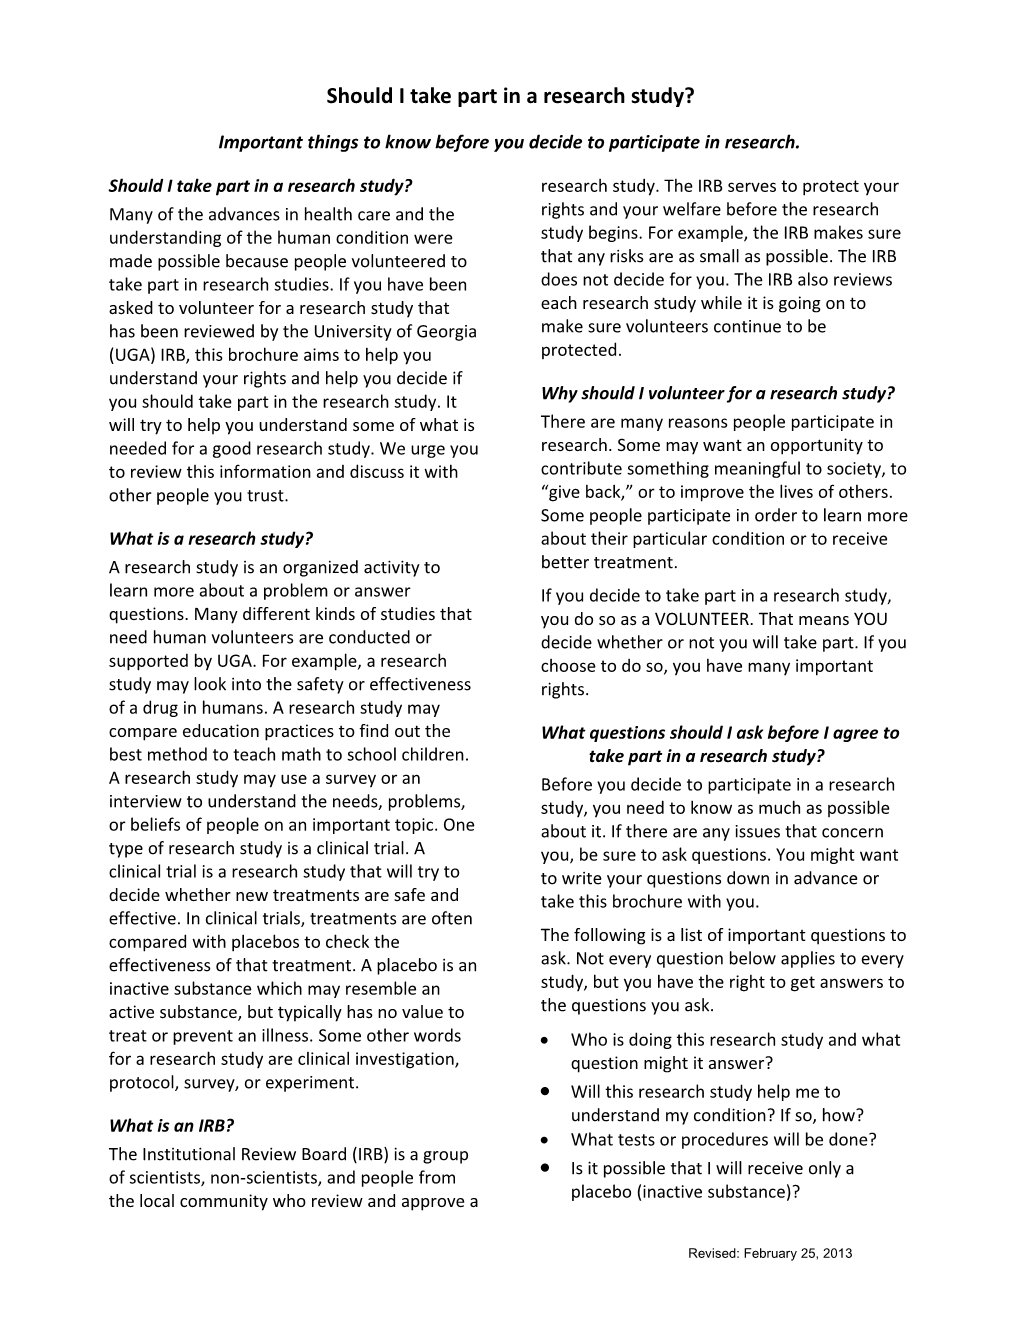 BROCHURE: Should I Take Part in Research